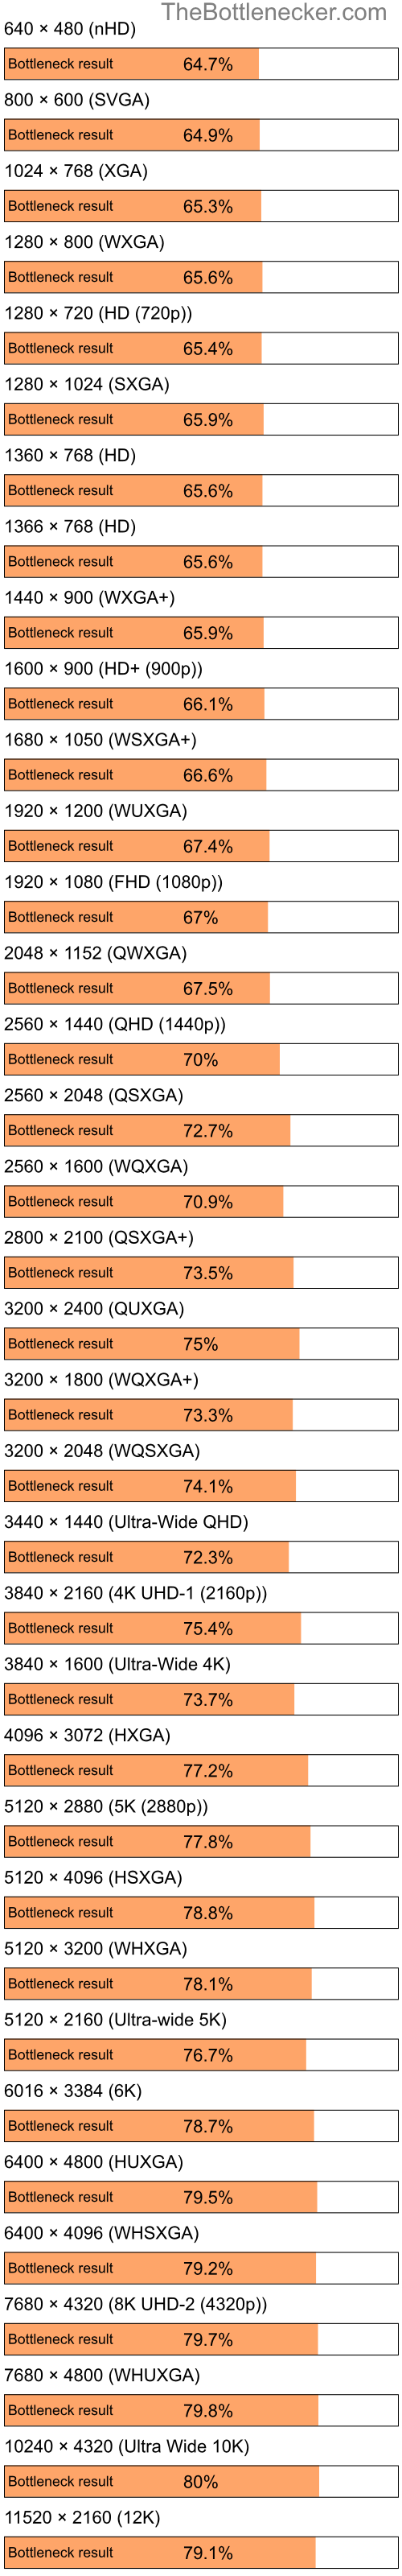 Bottleneck results by resolution for Intel Atom Z520 and NVIDIA Quadro FX 370 in General Tasks